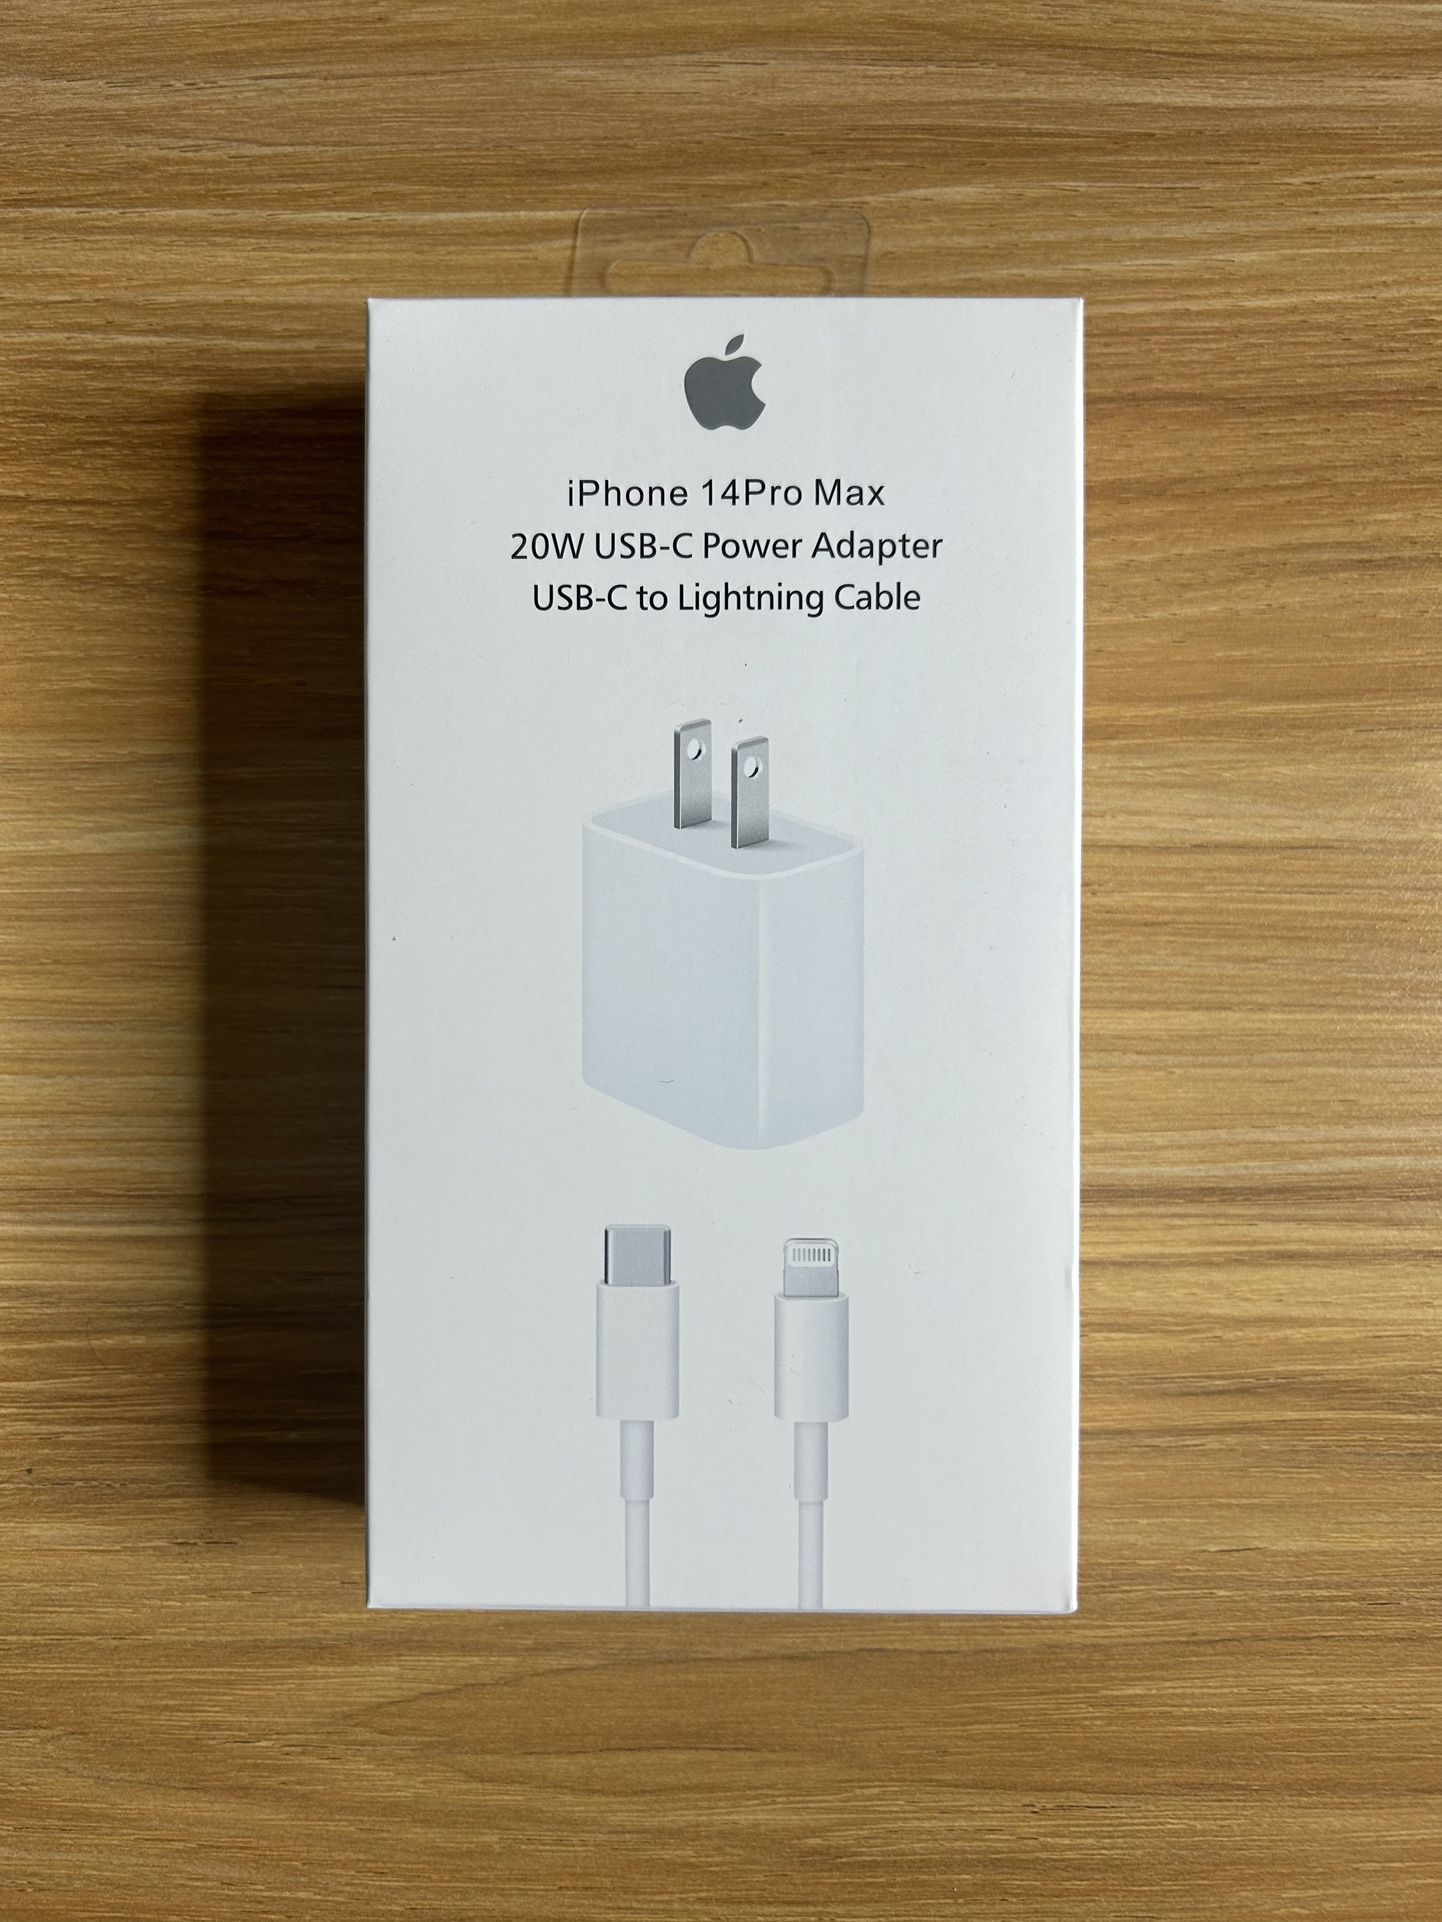 Iphone Fast Charger